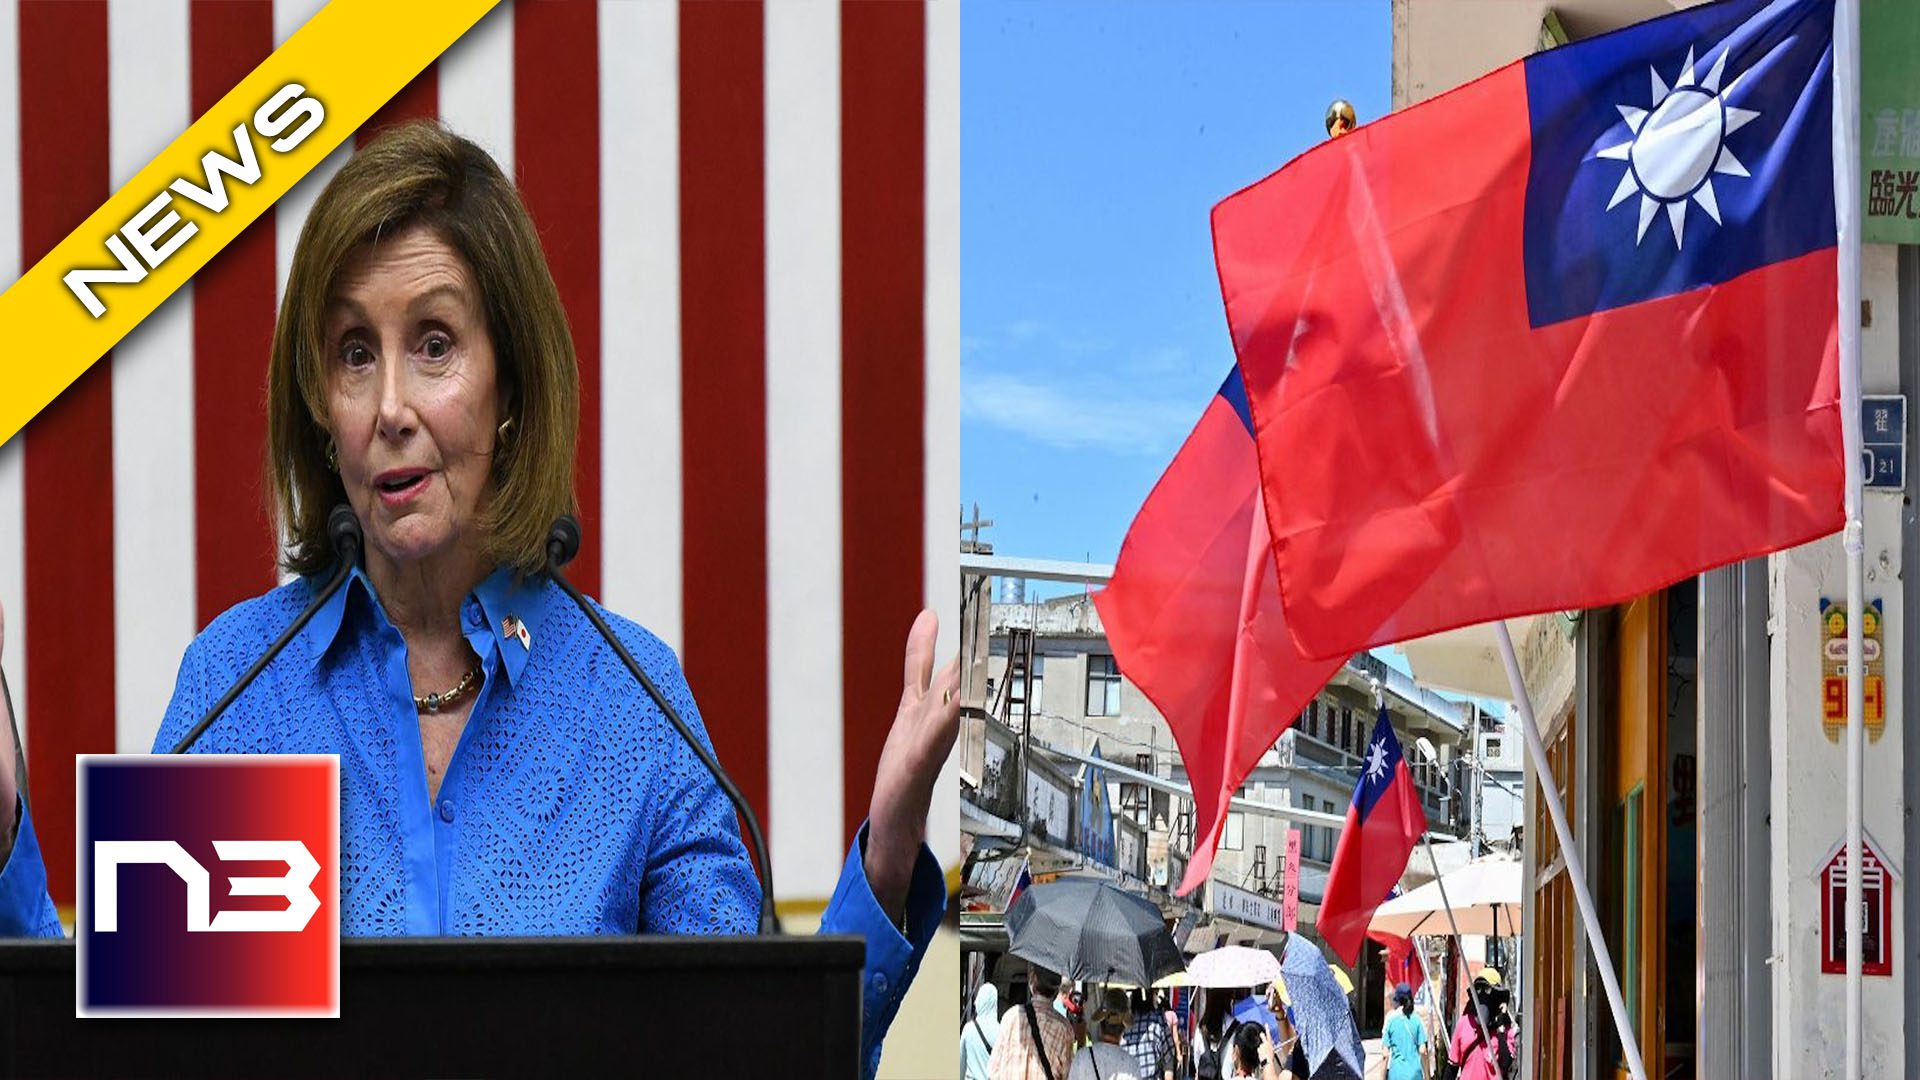 Pelosi's Taiwan Trip Prompts US Lawmakers to Make Unannounced Visit